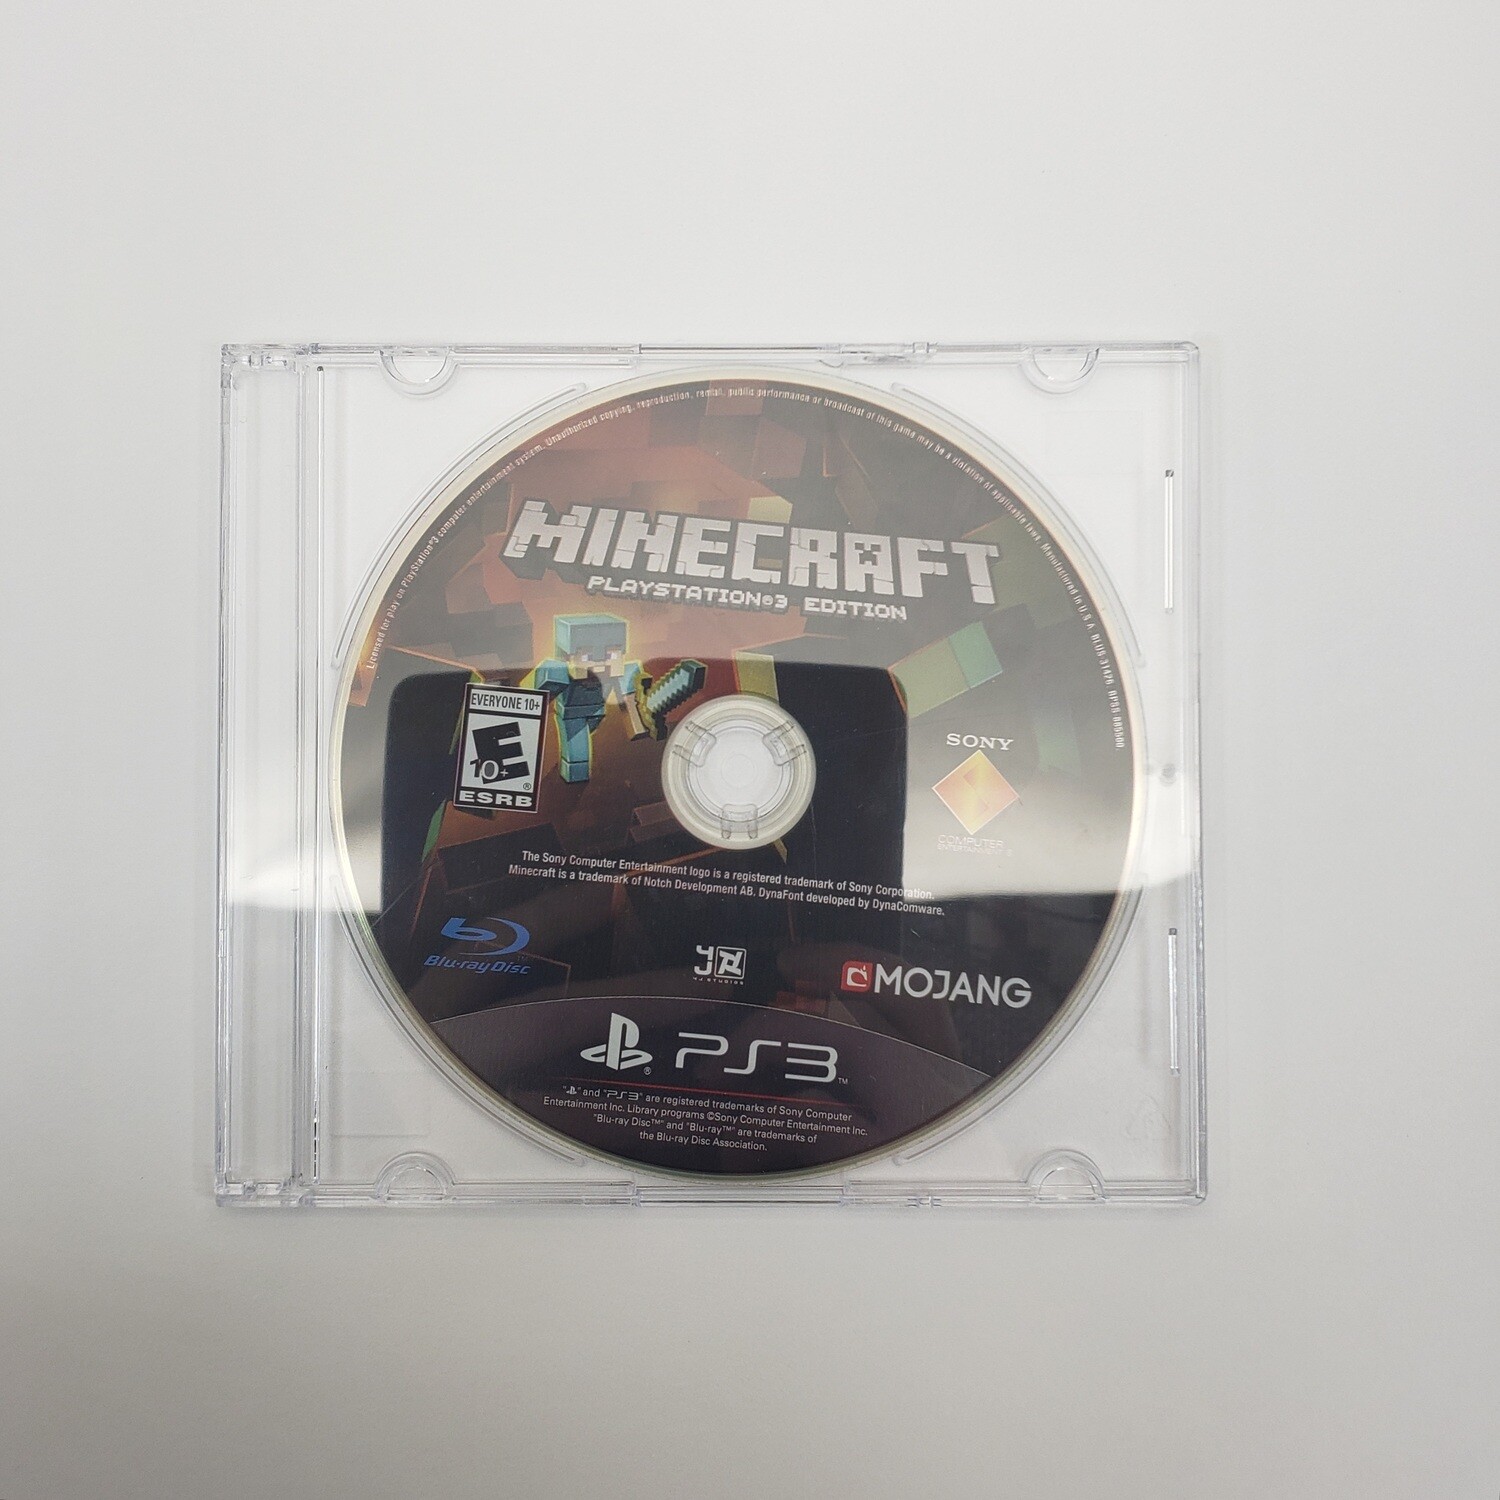 Minecraft PlayStation 3 Edition Video Game for PS3 - Used